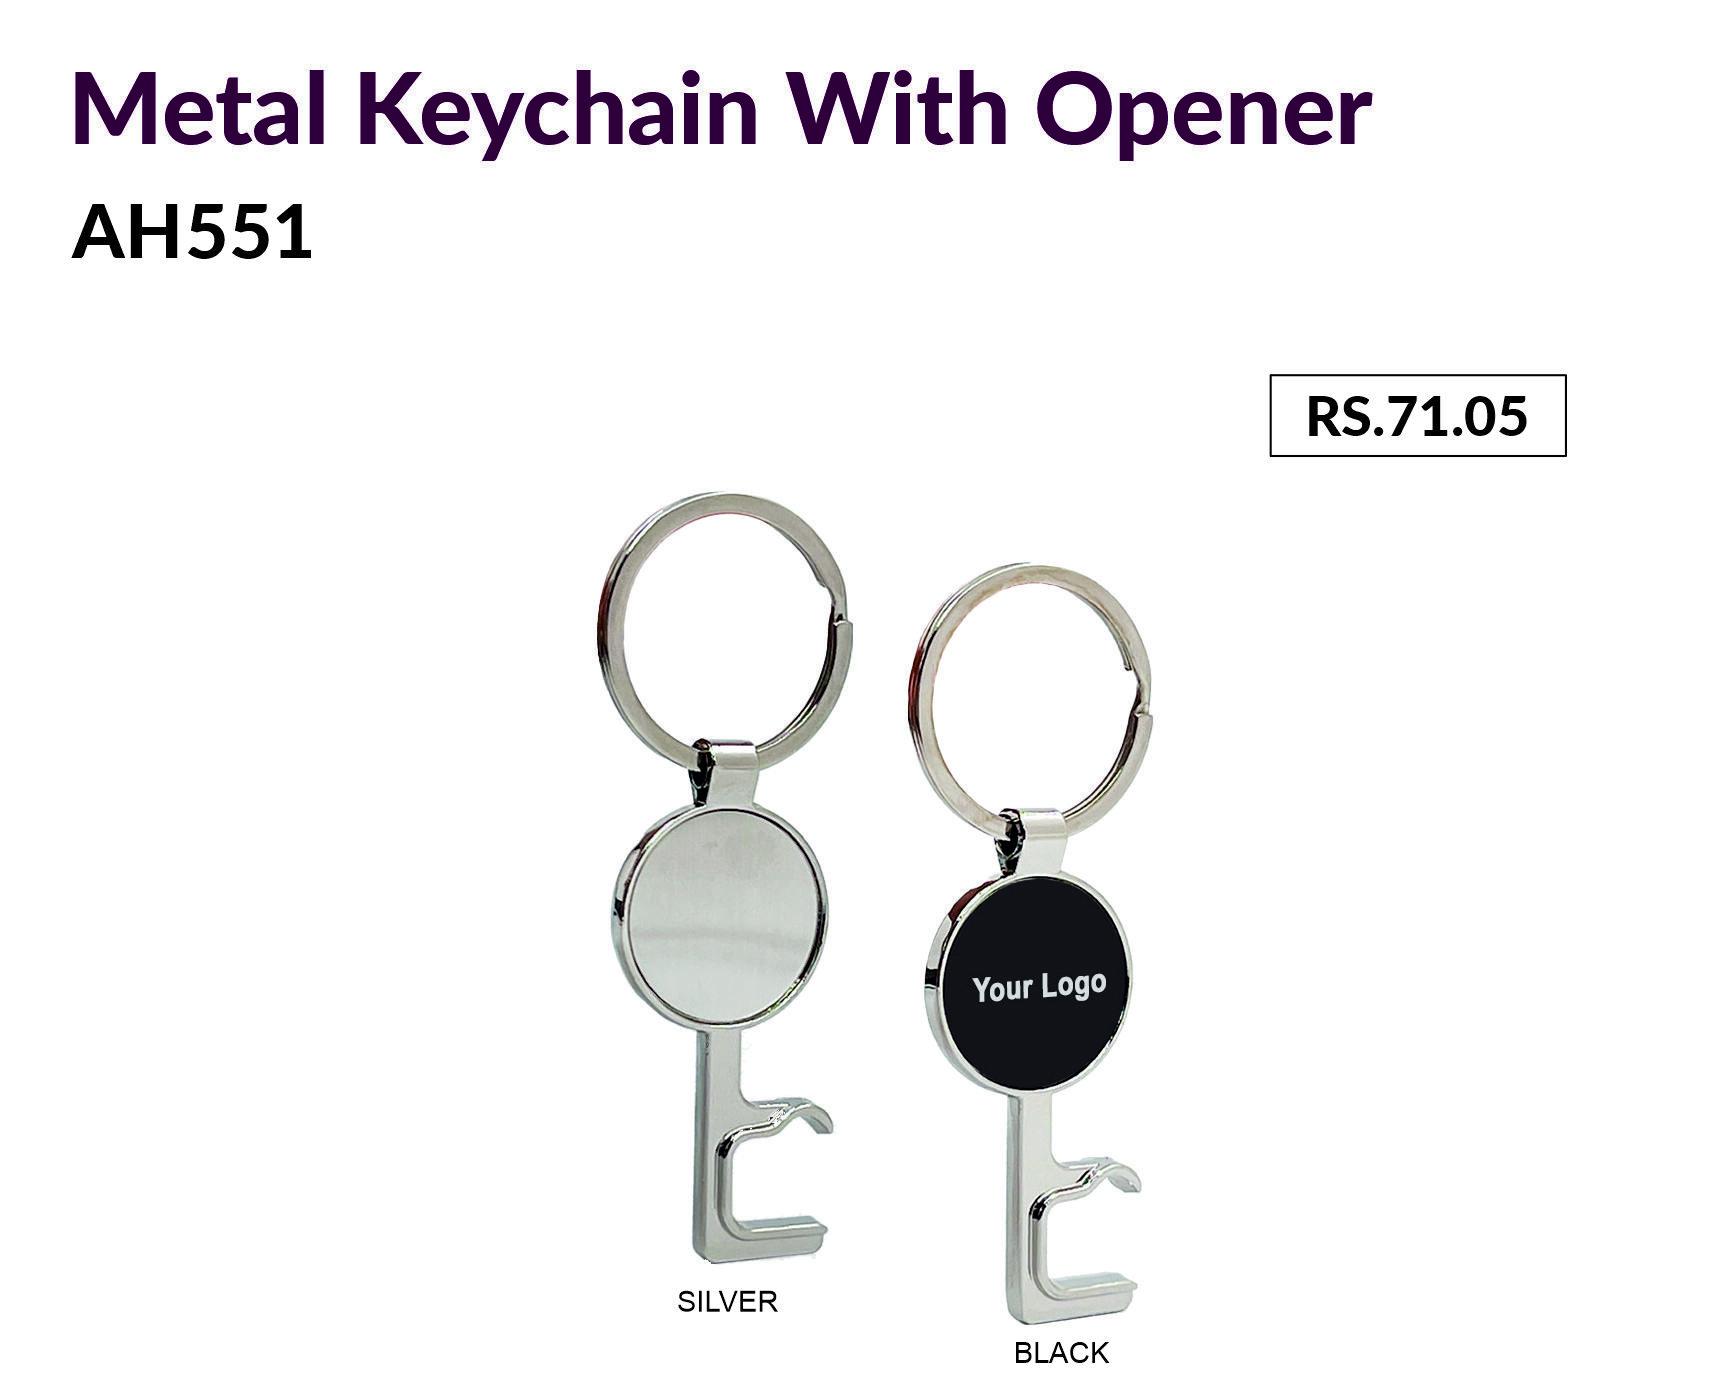 Metal Keychain With Opener